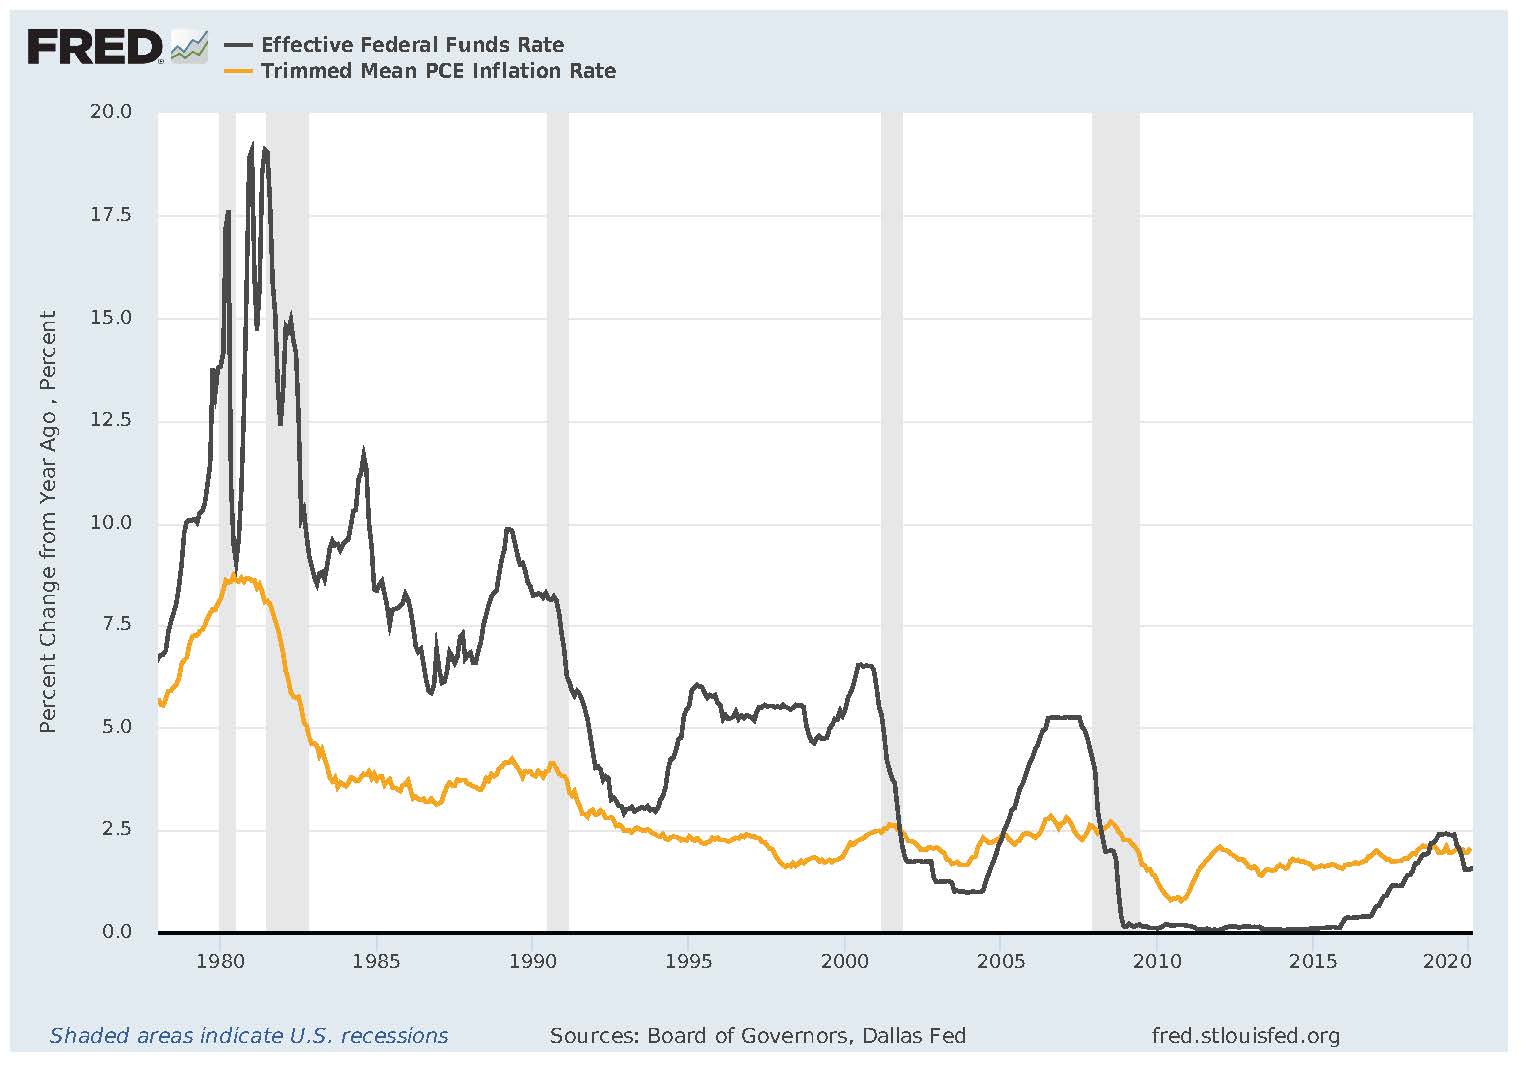 The Federal Reserve kept the Fed Funds Rate remained 2-3 percent above the inflation rate from the early 1980s to 2001. Since then, it has mostly been below the inflation rate, near zero for half a decade..